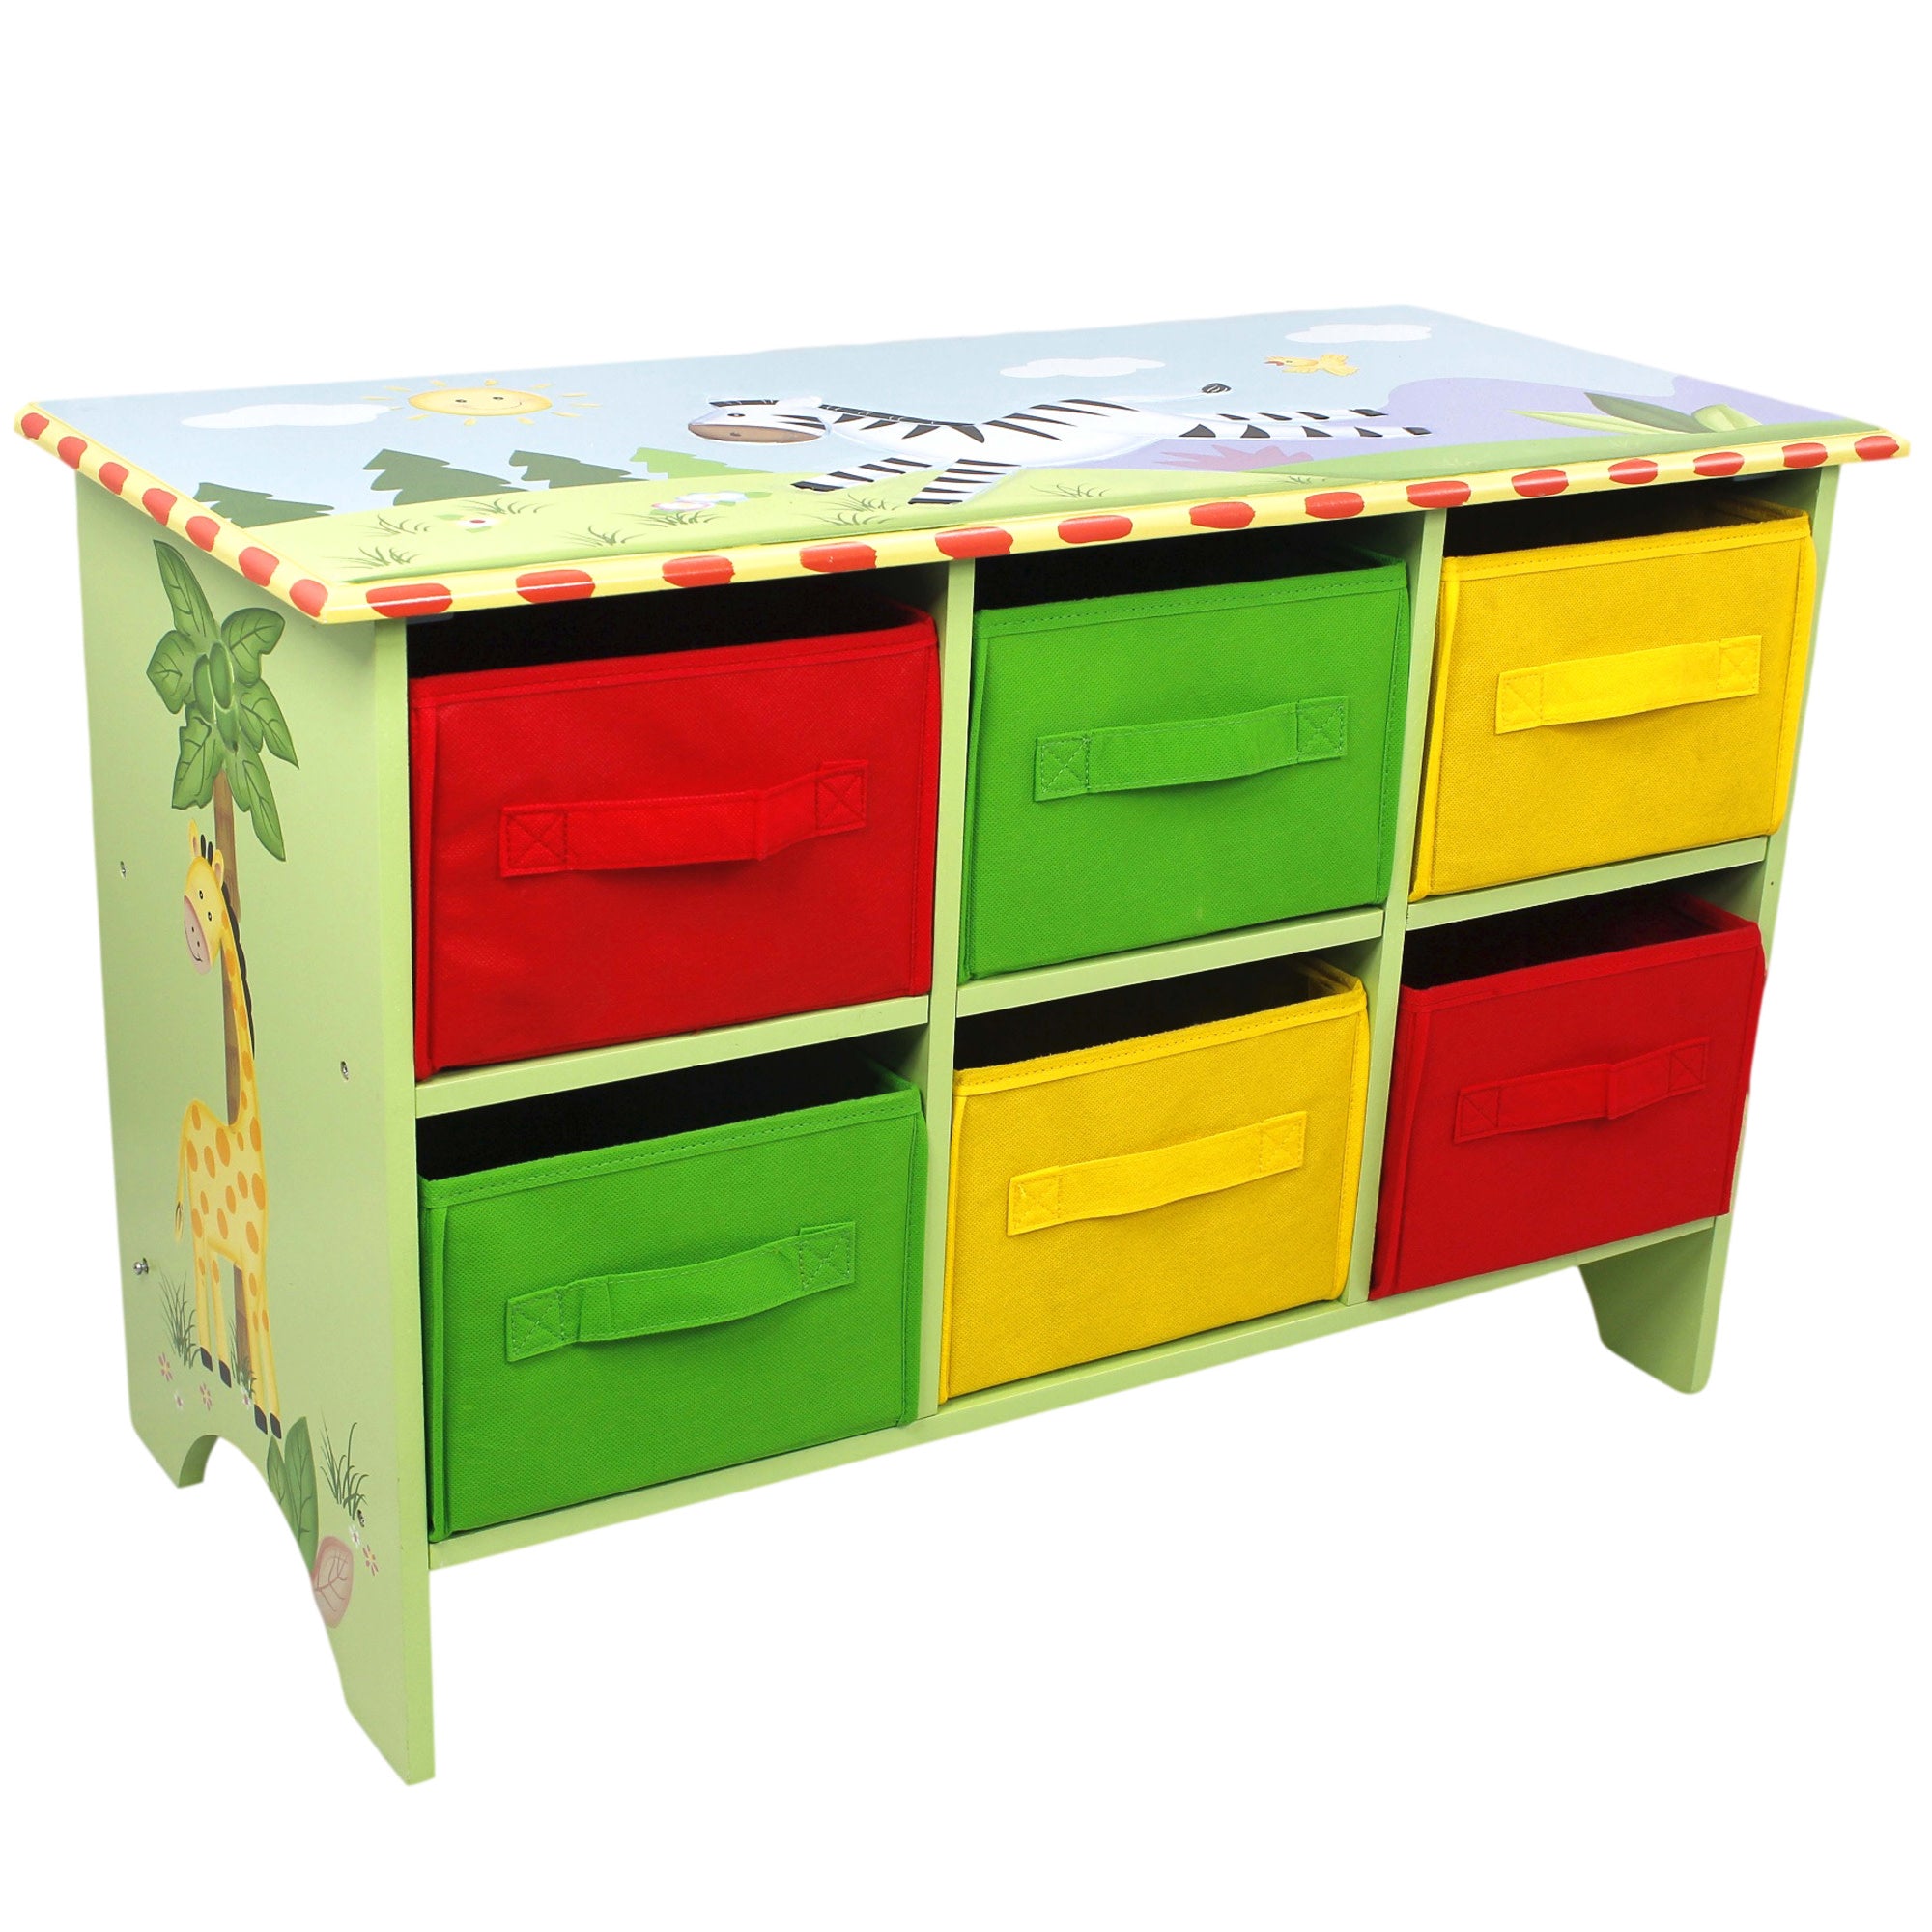 Fantasy Fields Sunny Safari Hand-Painted Storage Cubby Base Set with 6 Canvas Bins, Green/Multi